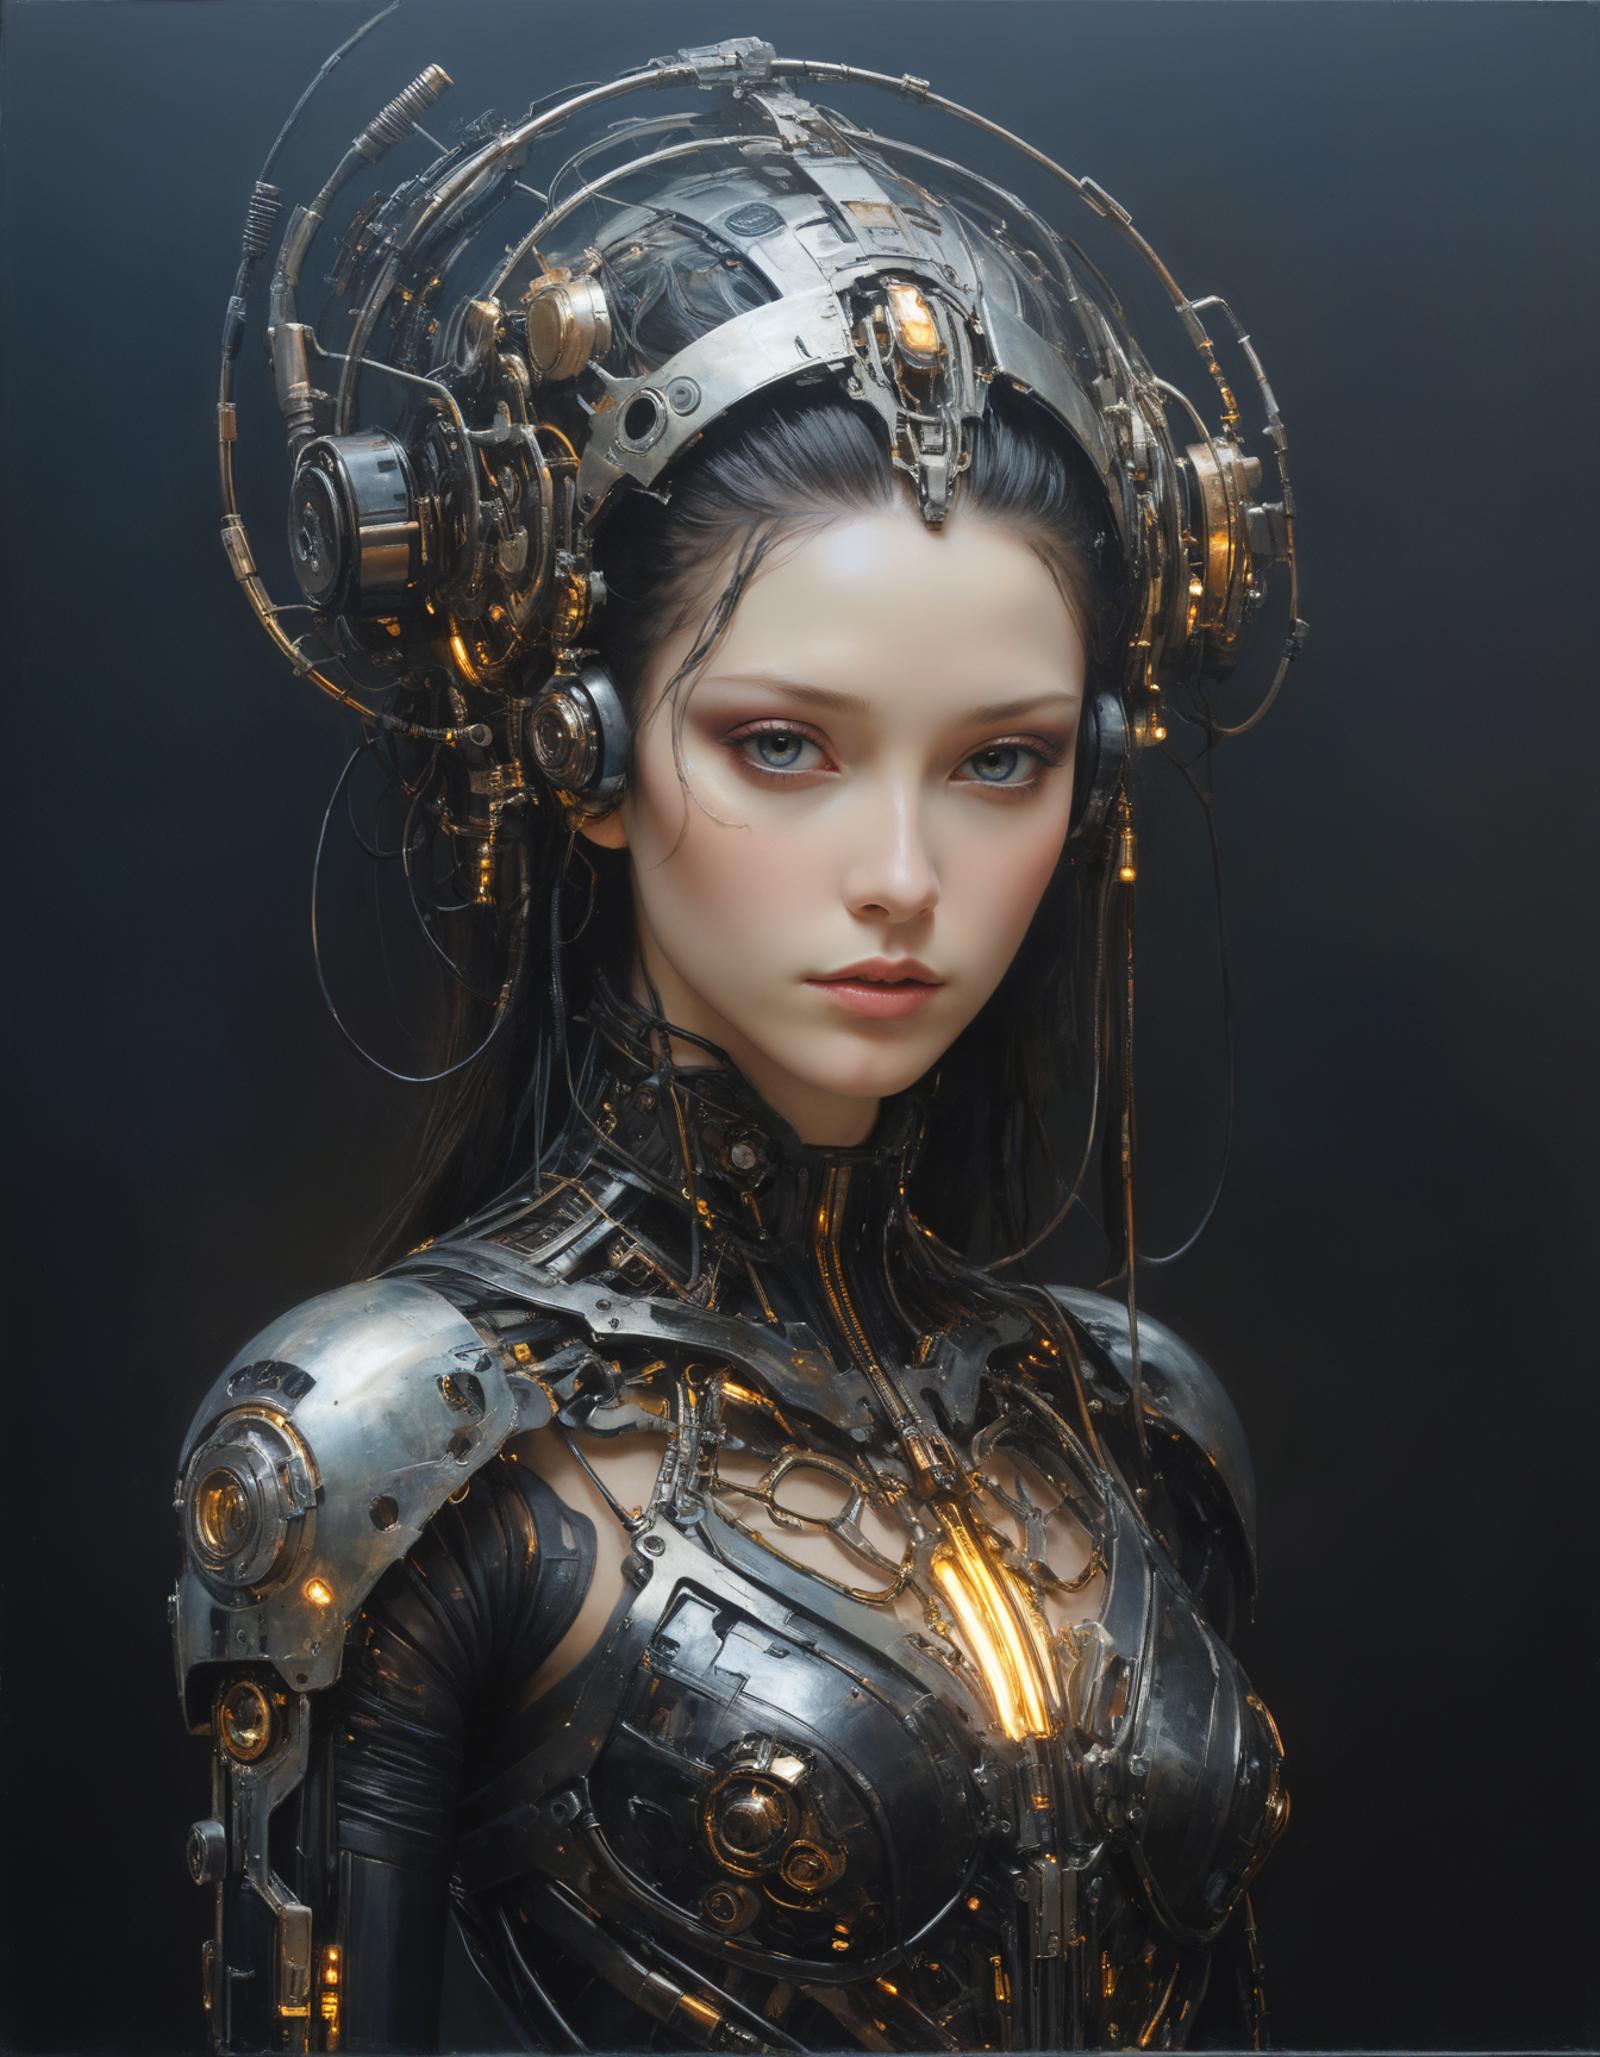 A dark, futuristic scene with a woman wearing a metal headpiece and a black dress.